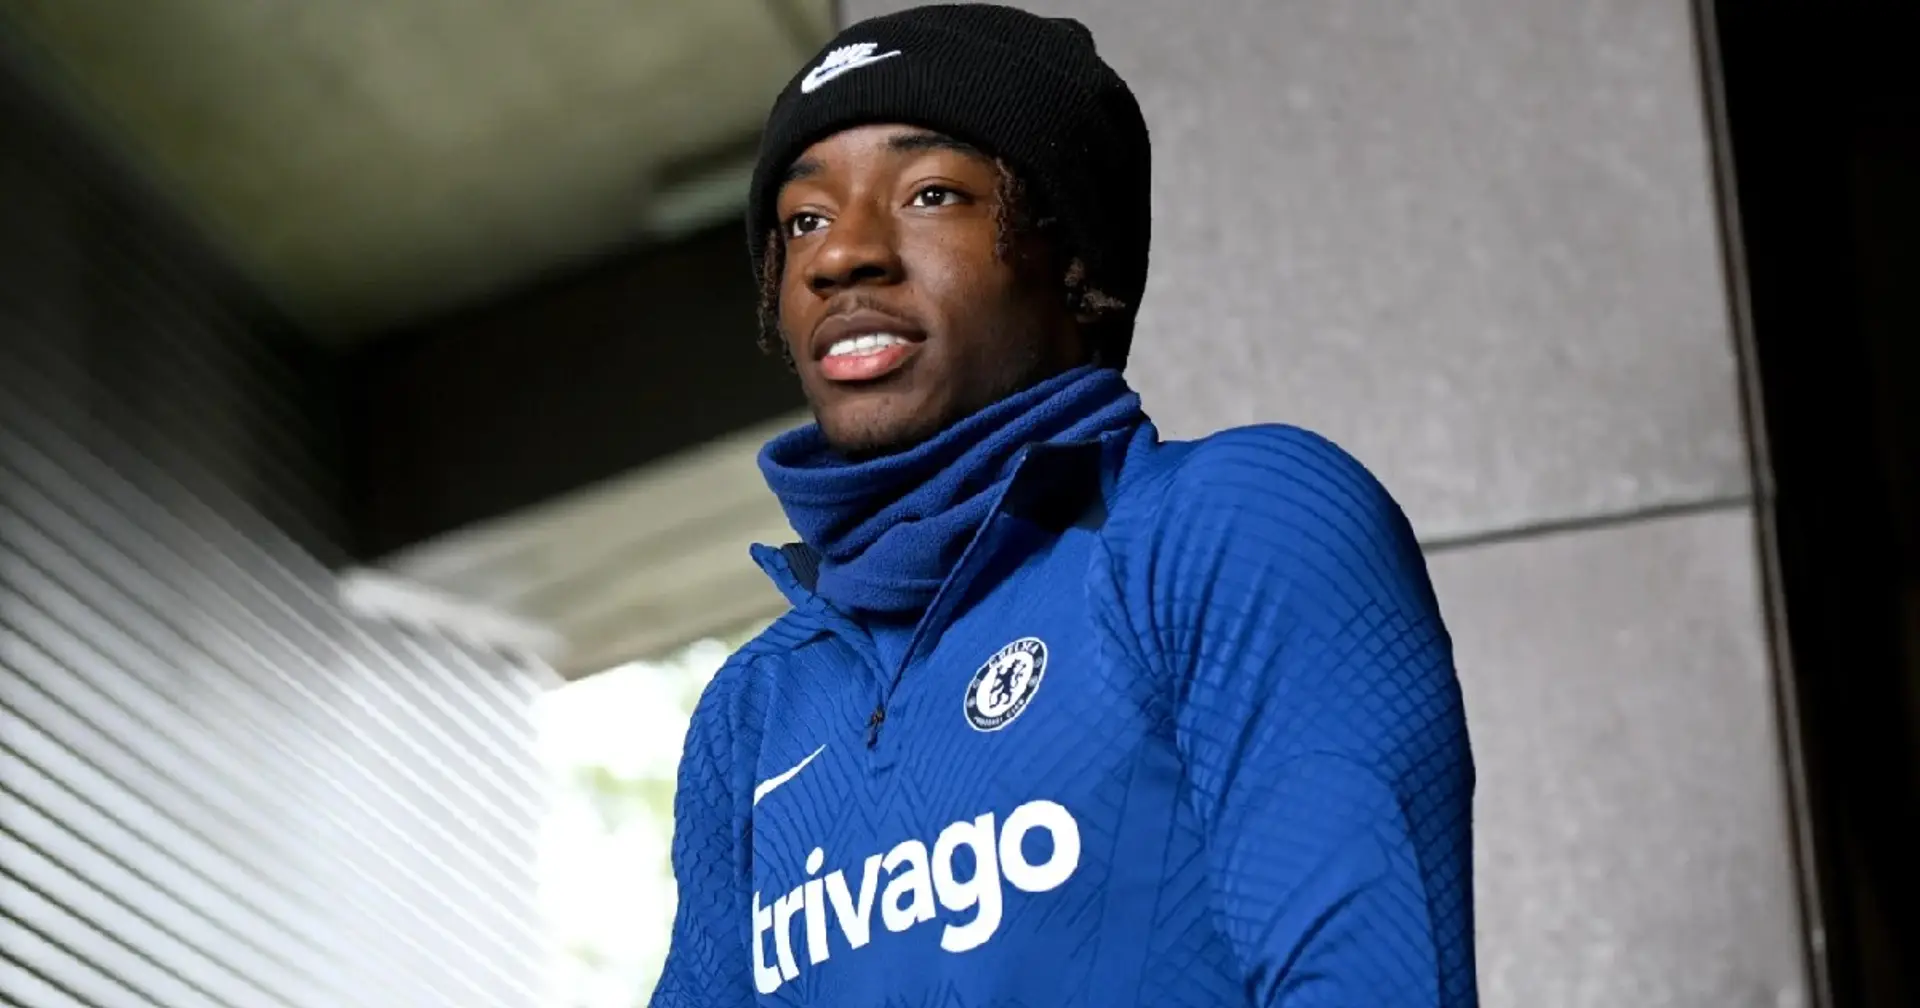 'It’s not just about recruiting talented players': Madueke on how Chelsea can get further up the table